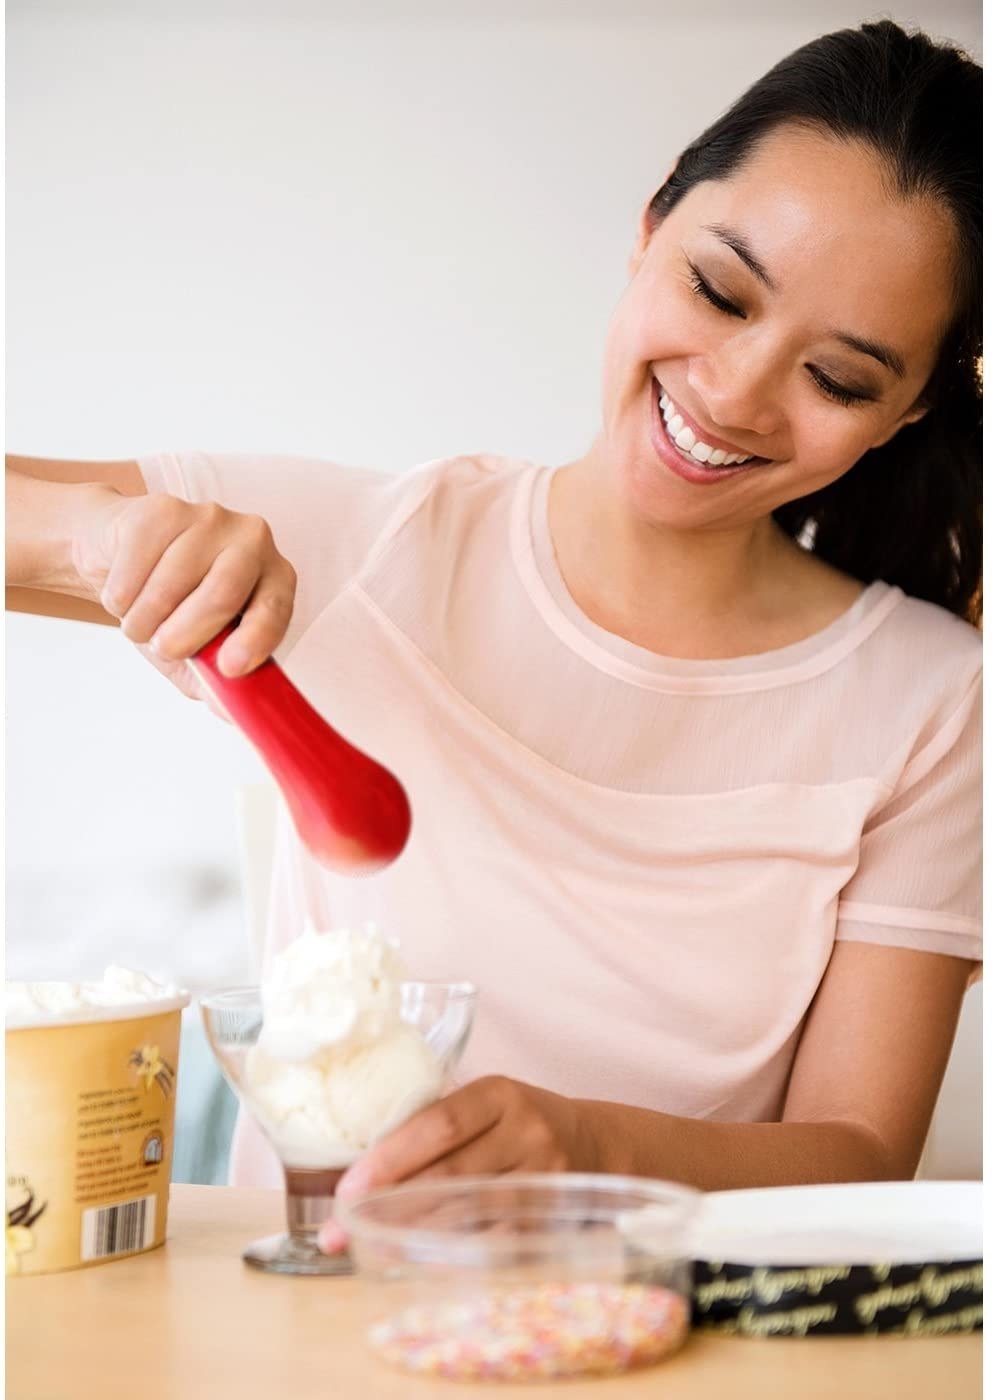 Model holding the red ice cream scoop and putting some ice cream into a cup